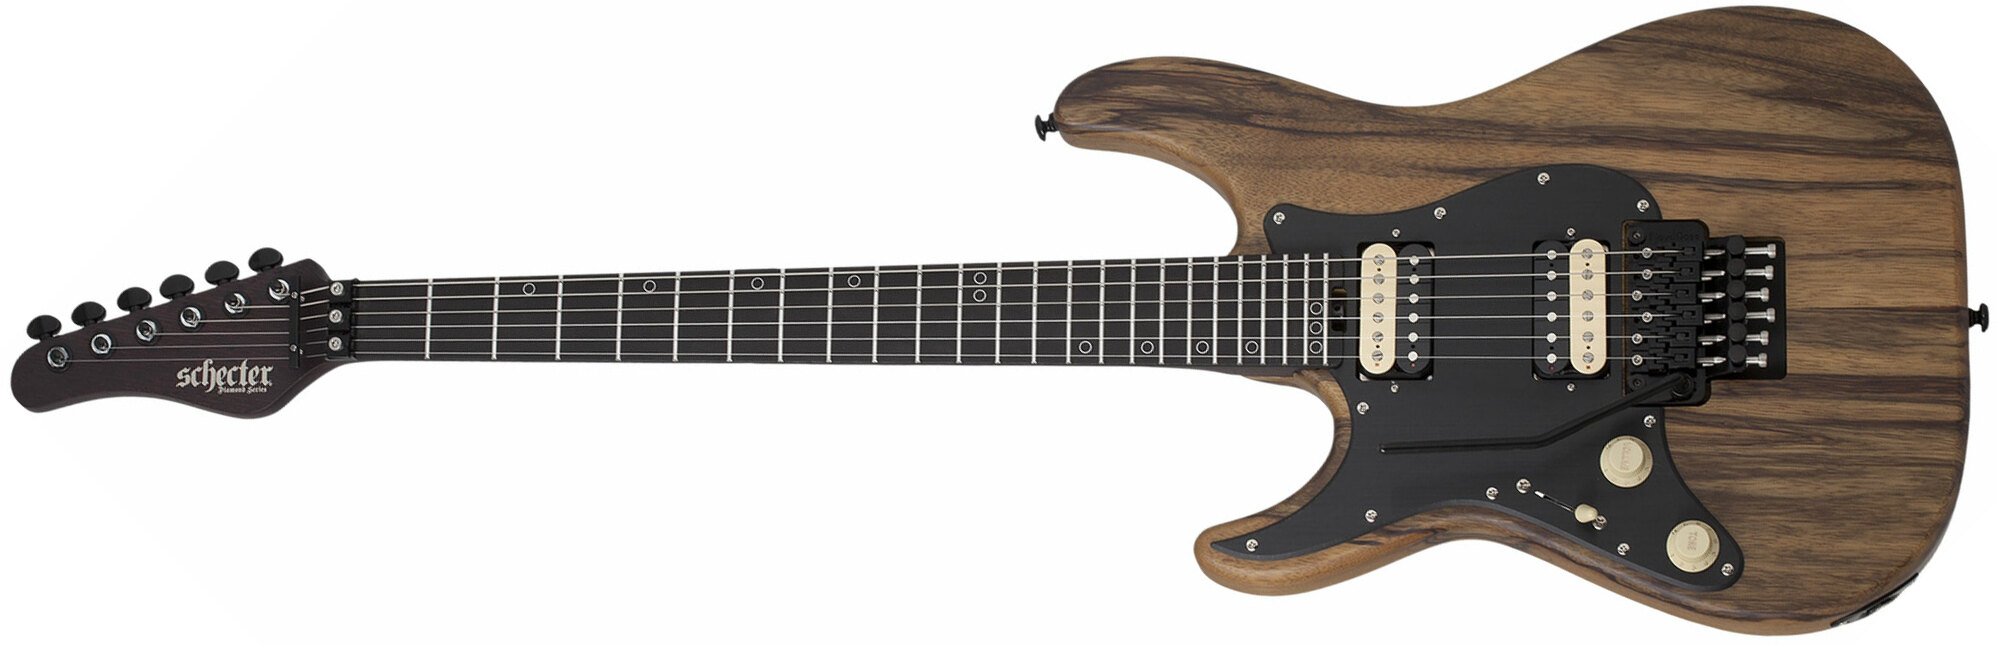 Schecter Sun Valley Super Shredder Exotic Black Limba Lh Gaucher 2h Fr Eb - Black Limba - Left-handed electric guitar - Main picture